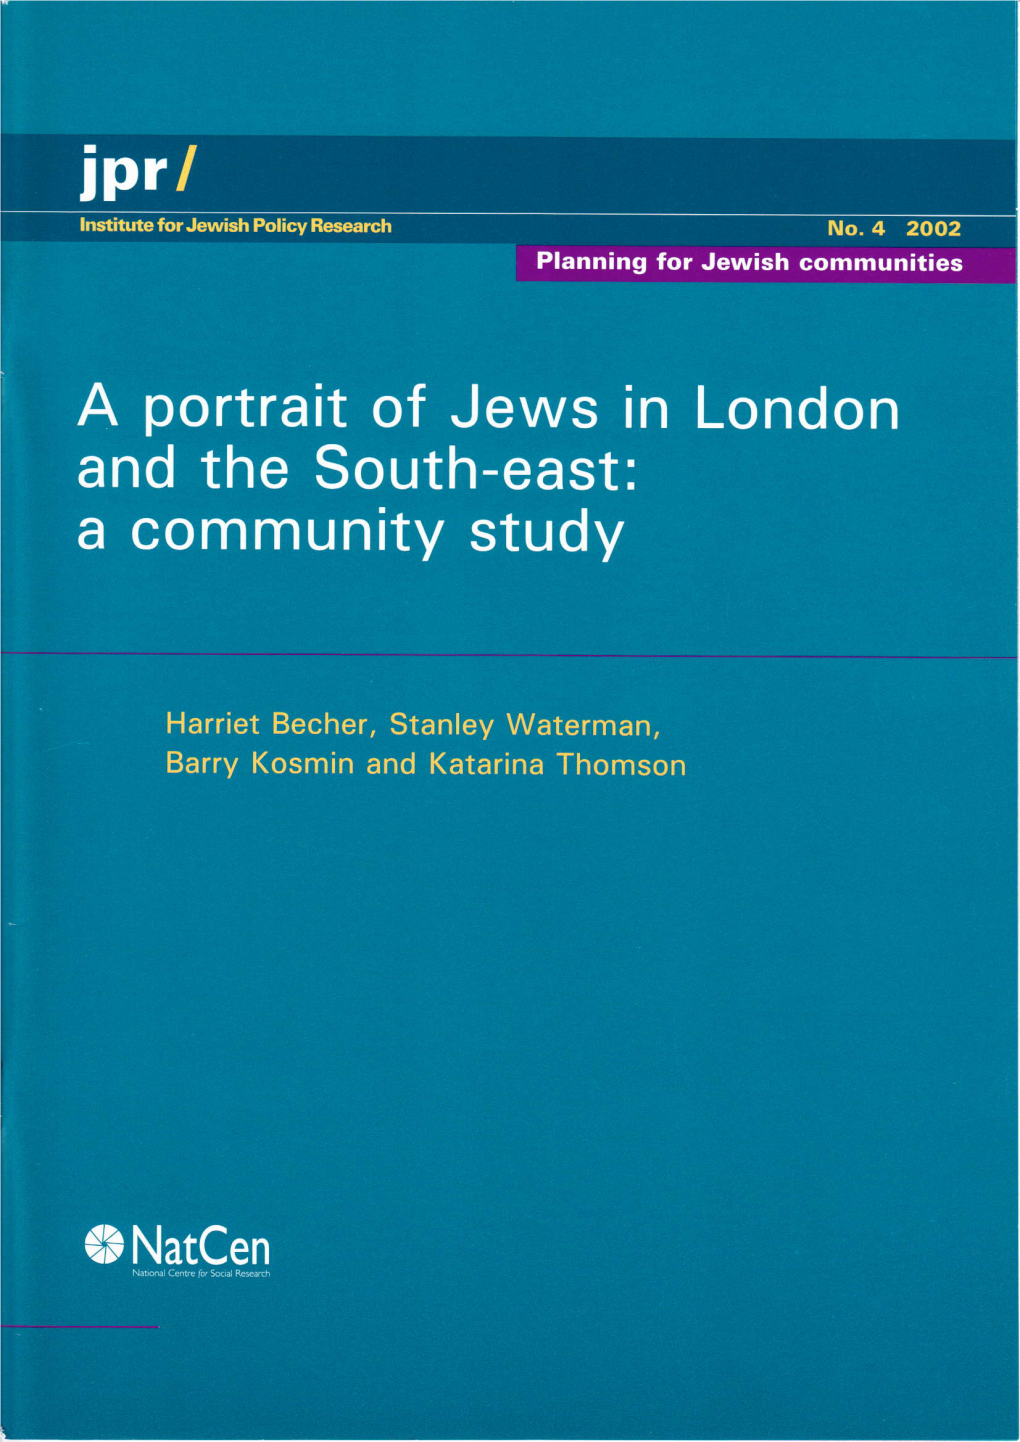 A Portrait of Jews in London and the South-East